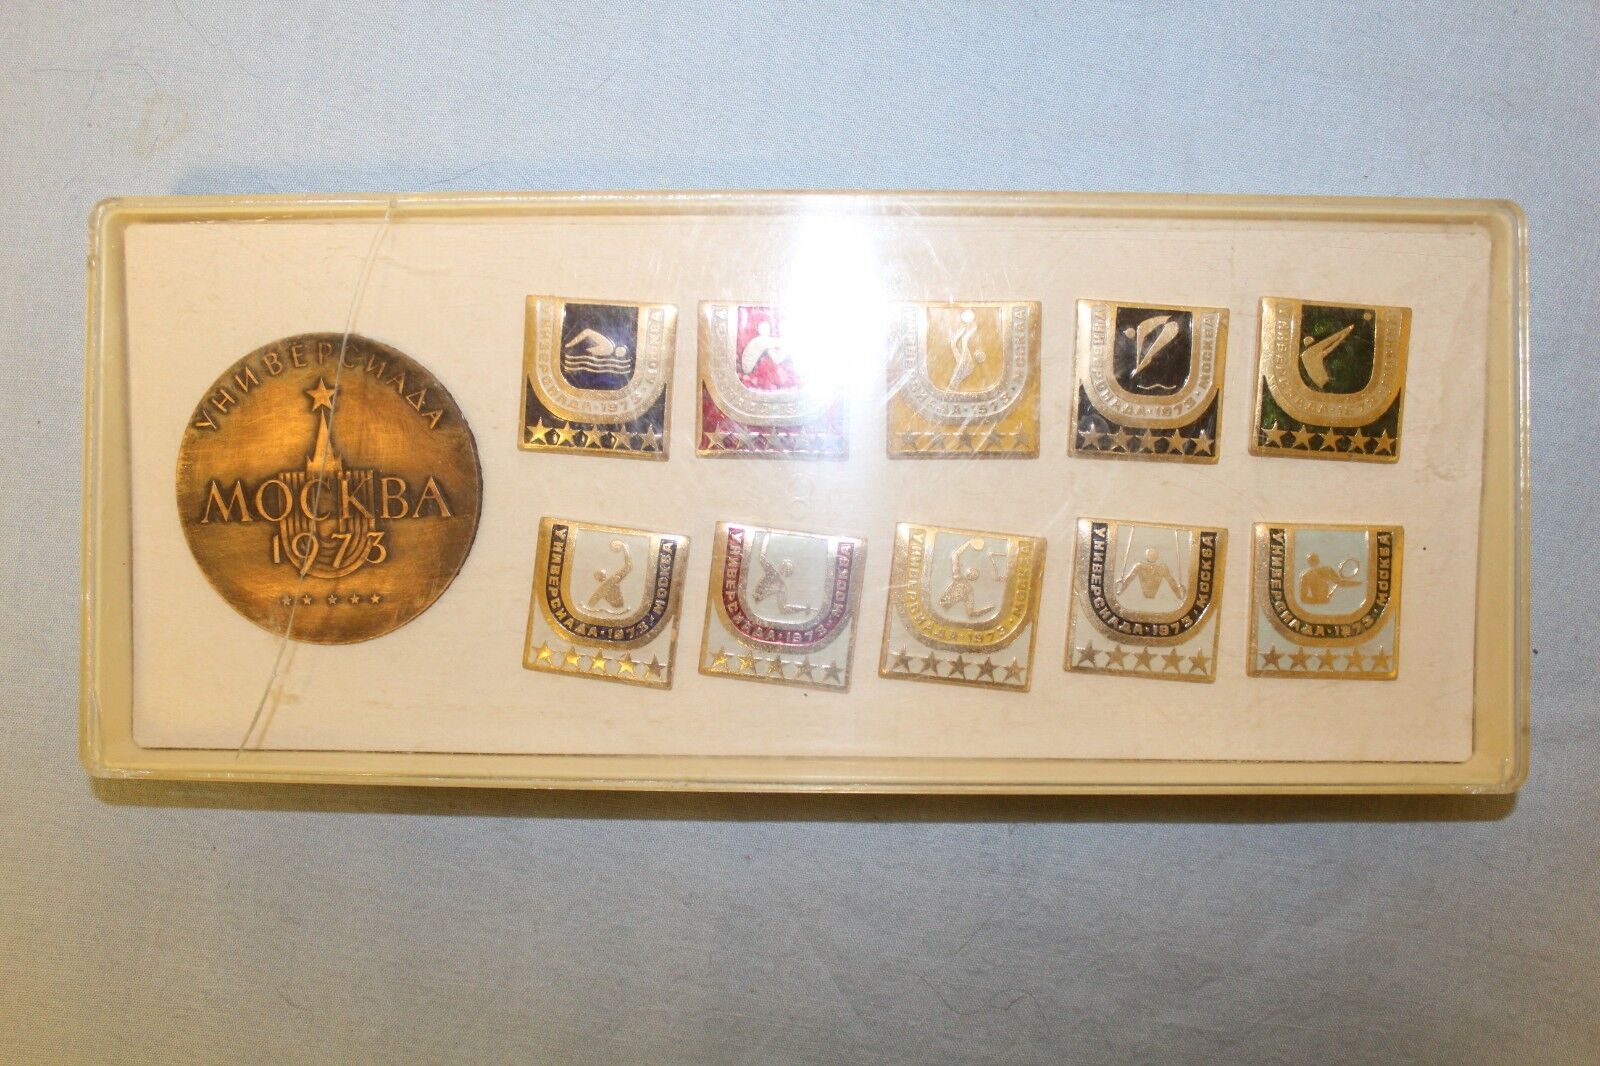 11874.Soviet University Game Badges (pins). Moscow, 1973. Gift set